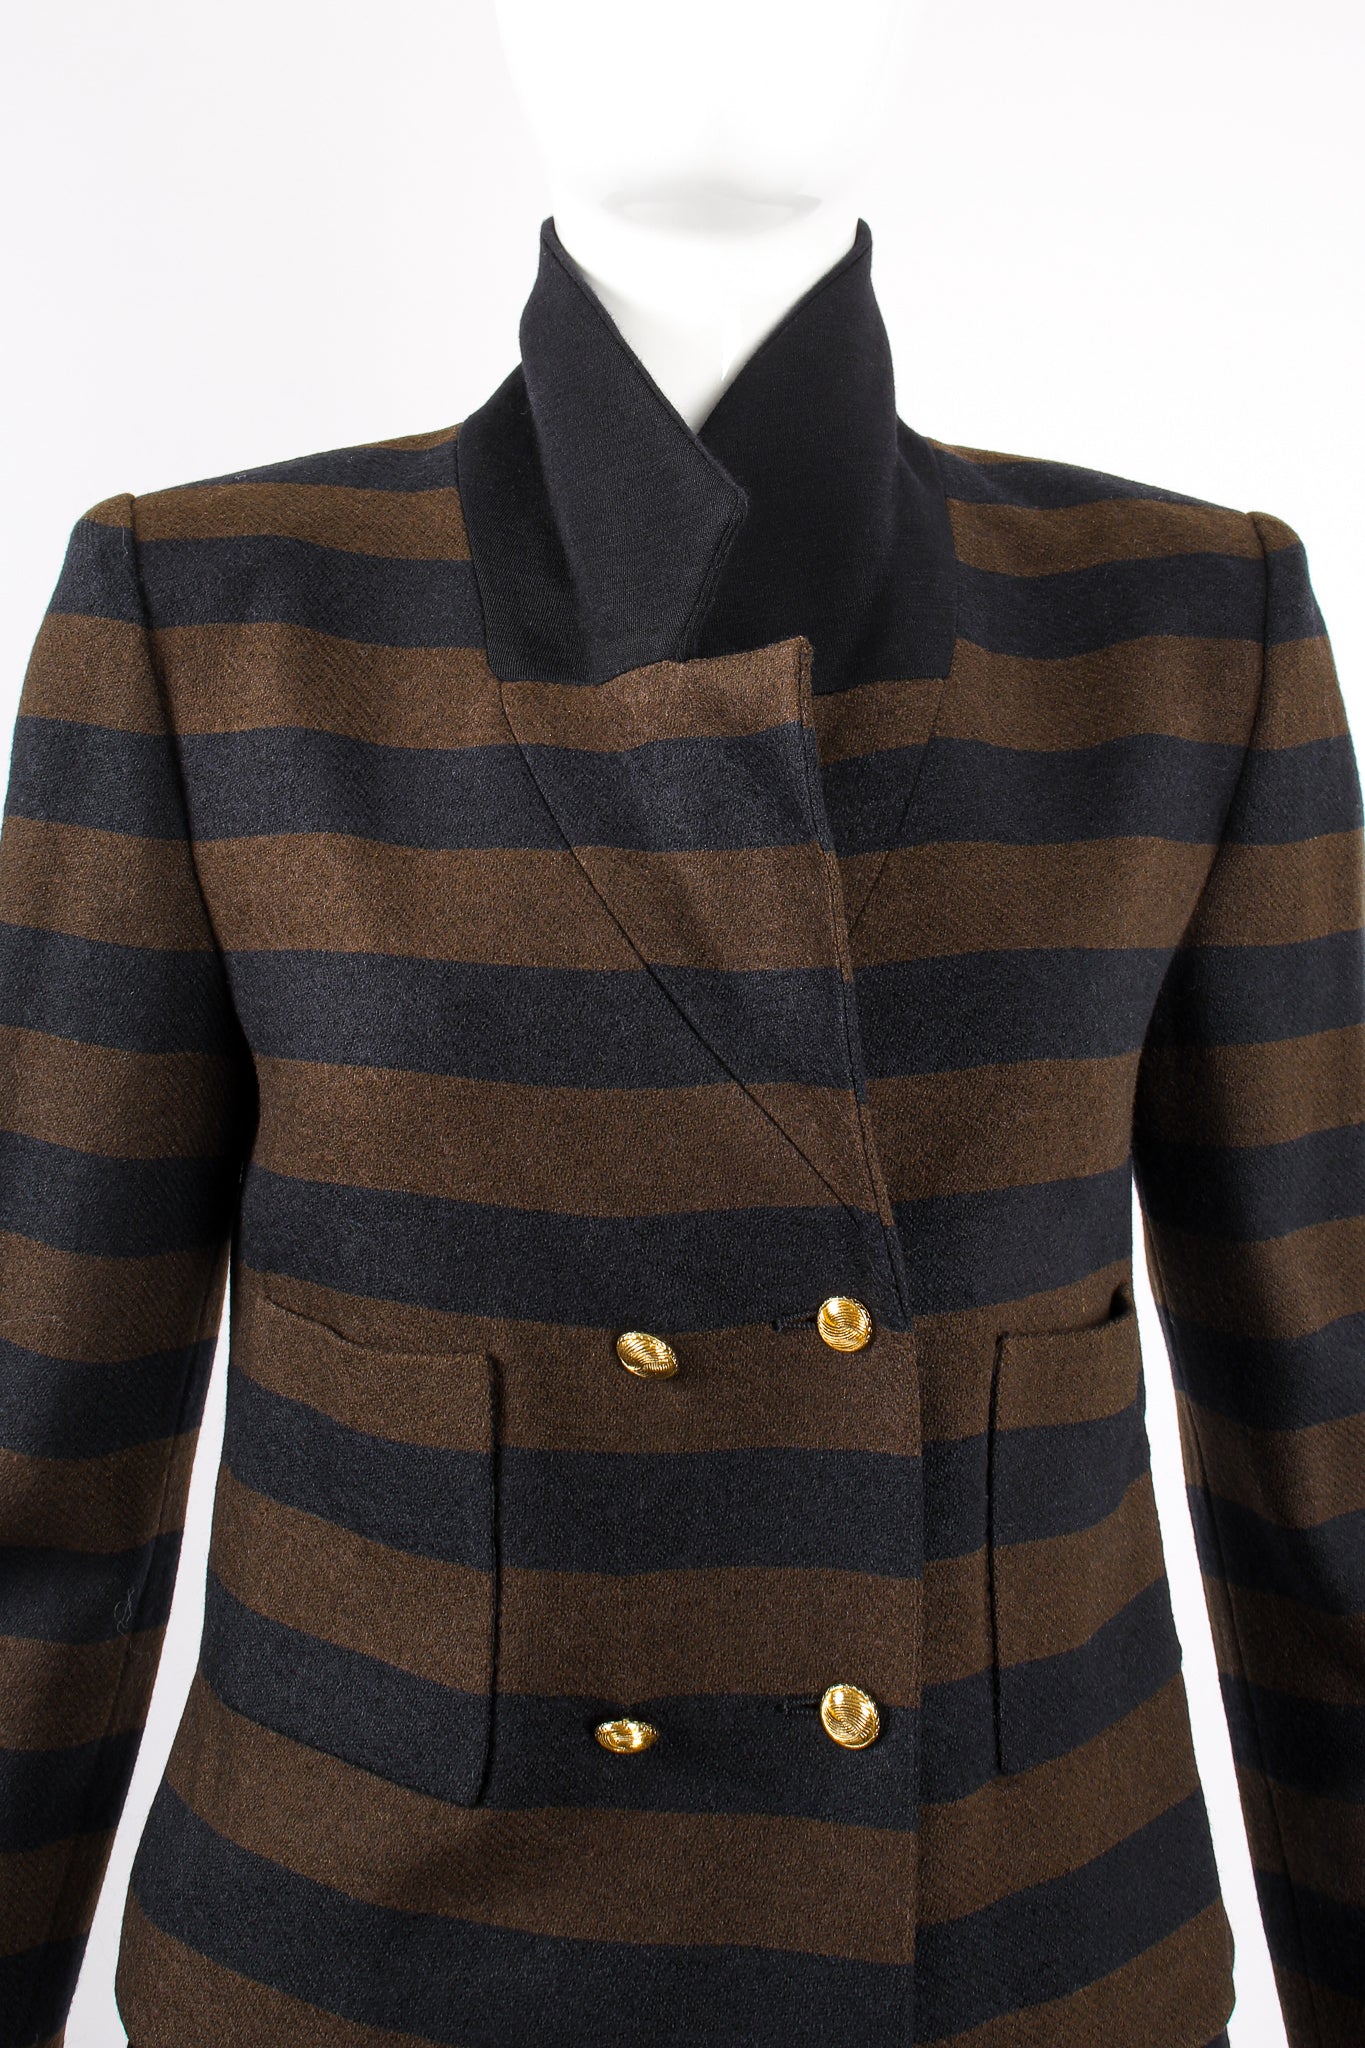 Vintage Chanel Striped Boxy Jacket & Skirt Set on Mannequin collar at Recess Los Angeles